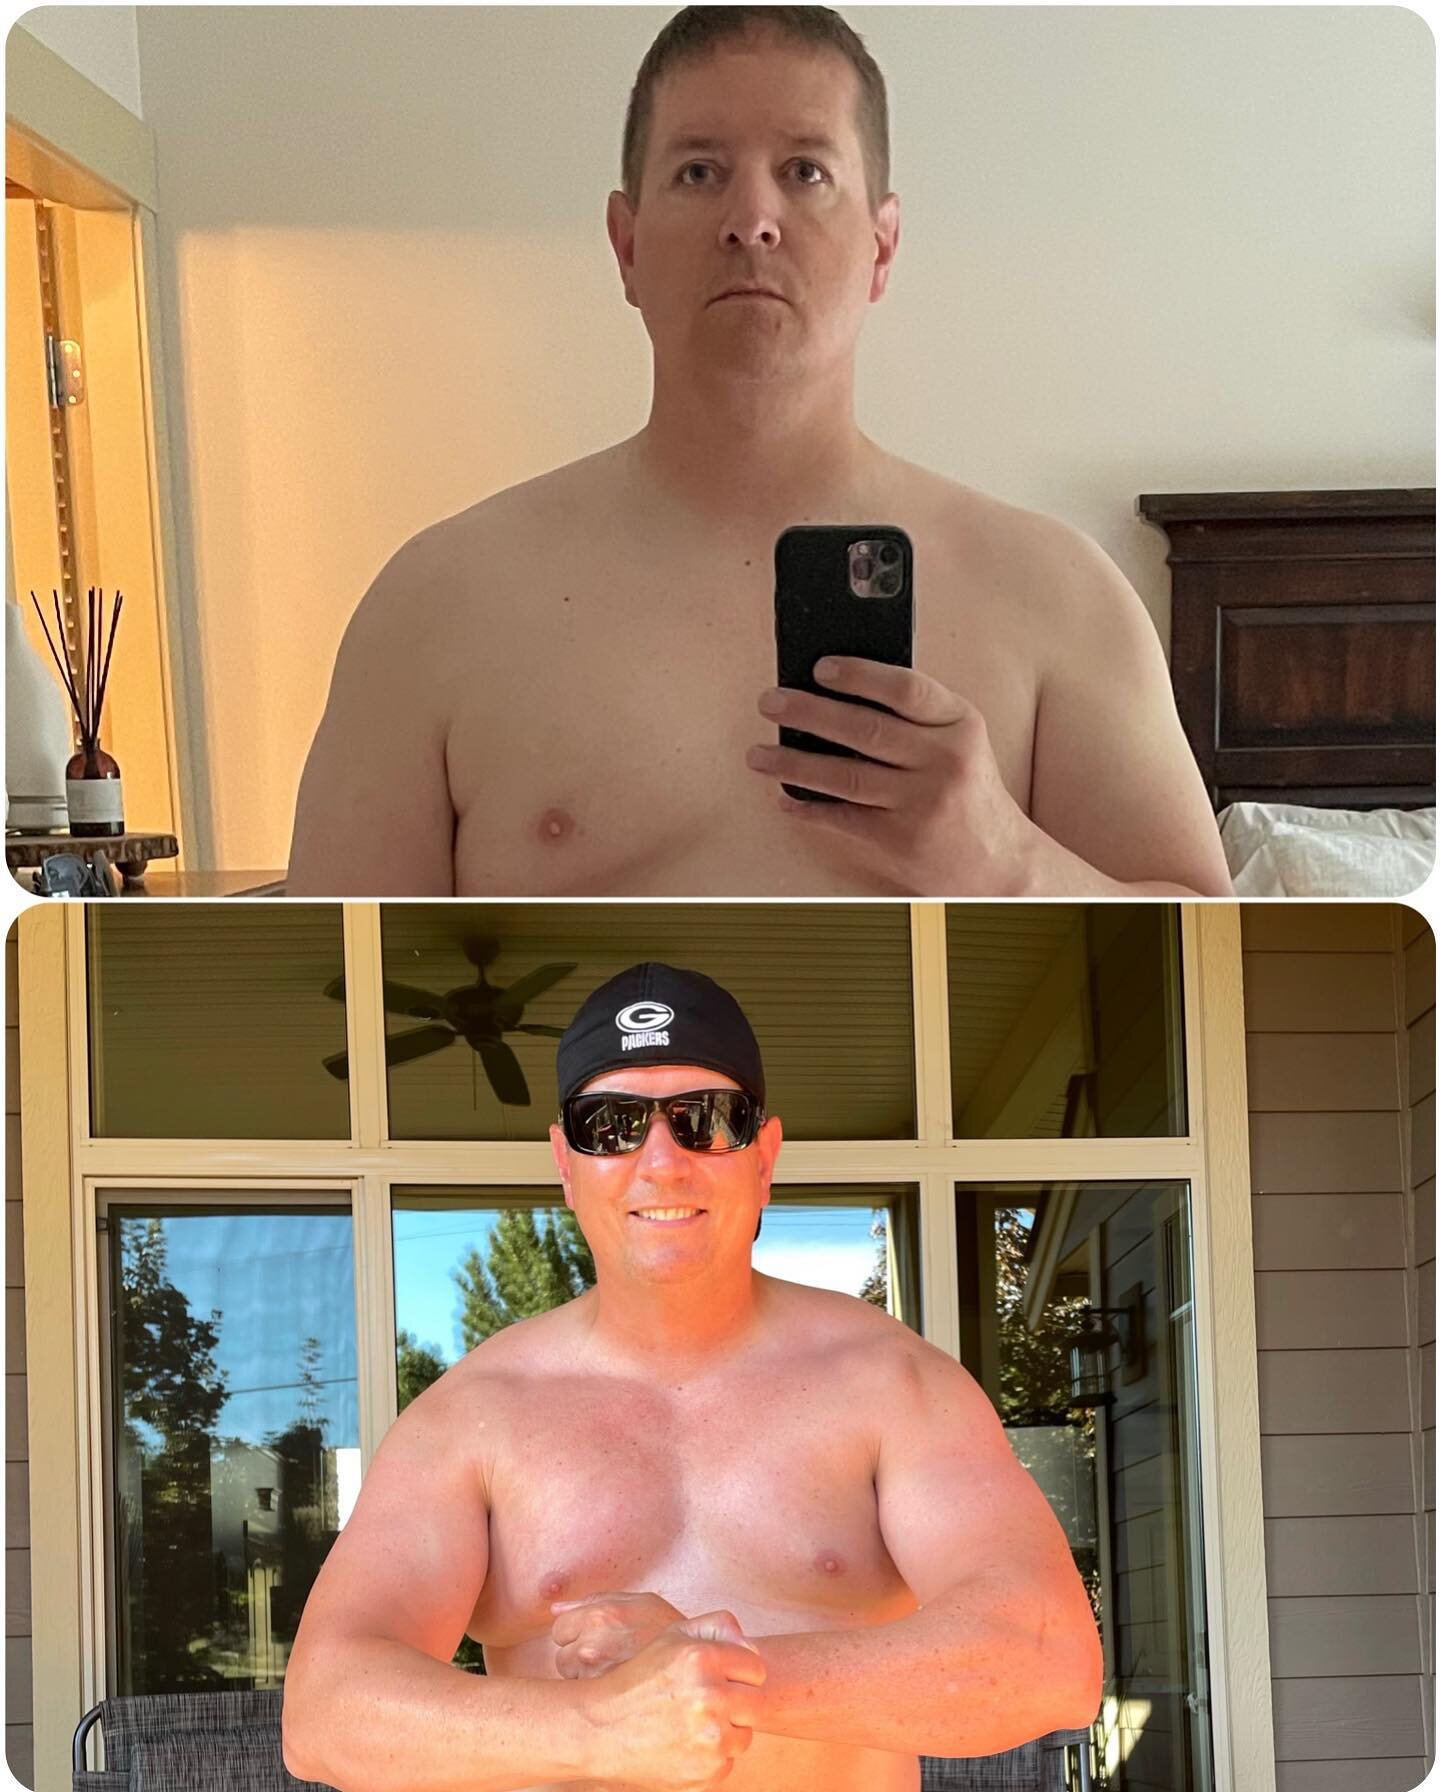 My weight has been an issue for a better part of my adult life. 
.
I&rsquo;ve been in the gym since I was in my late teens, I&rsquo;ve never really taken the kitchen seriously. 
.
I finally hit a point in my life at 47 where I realized I needed a lot